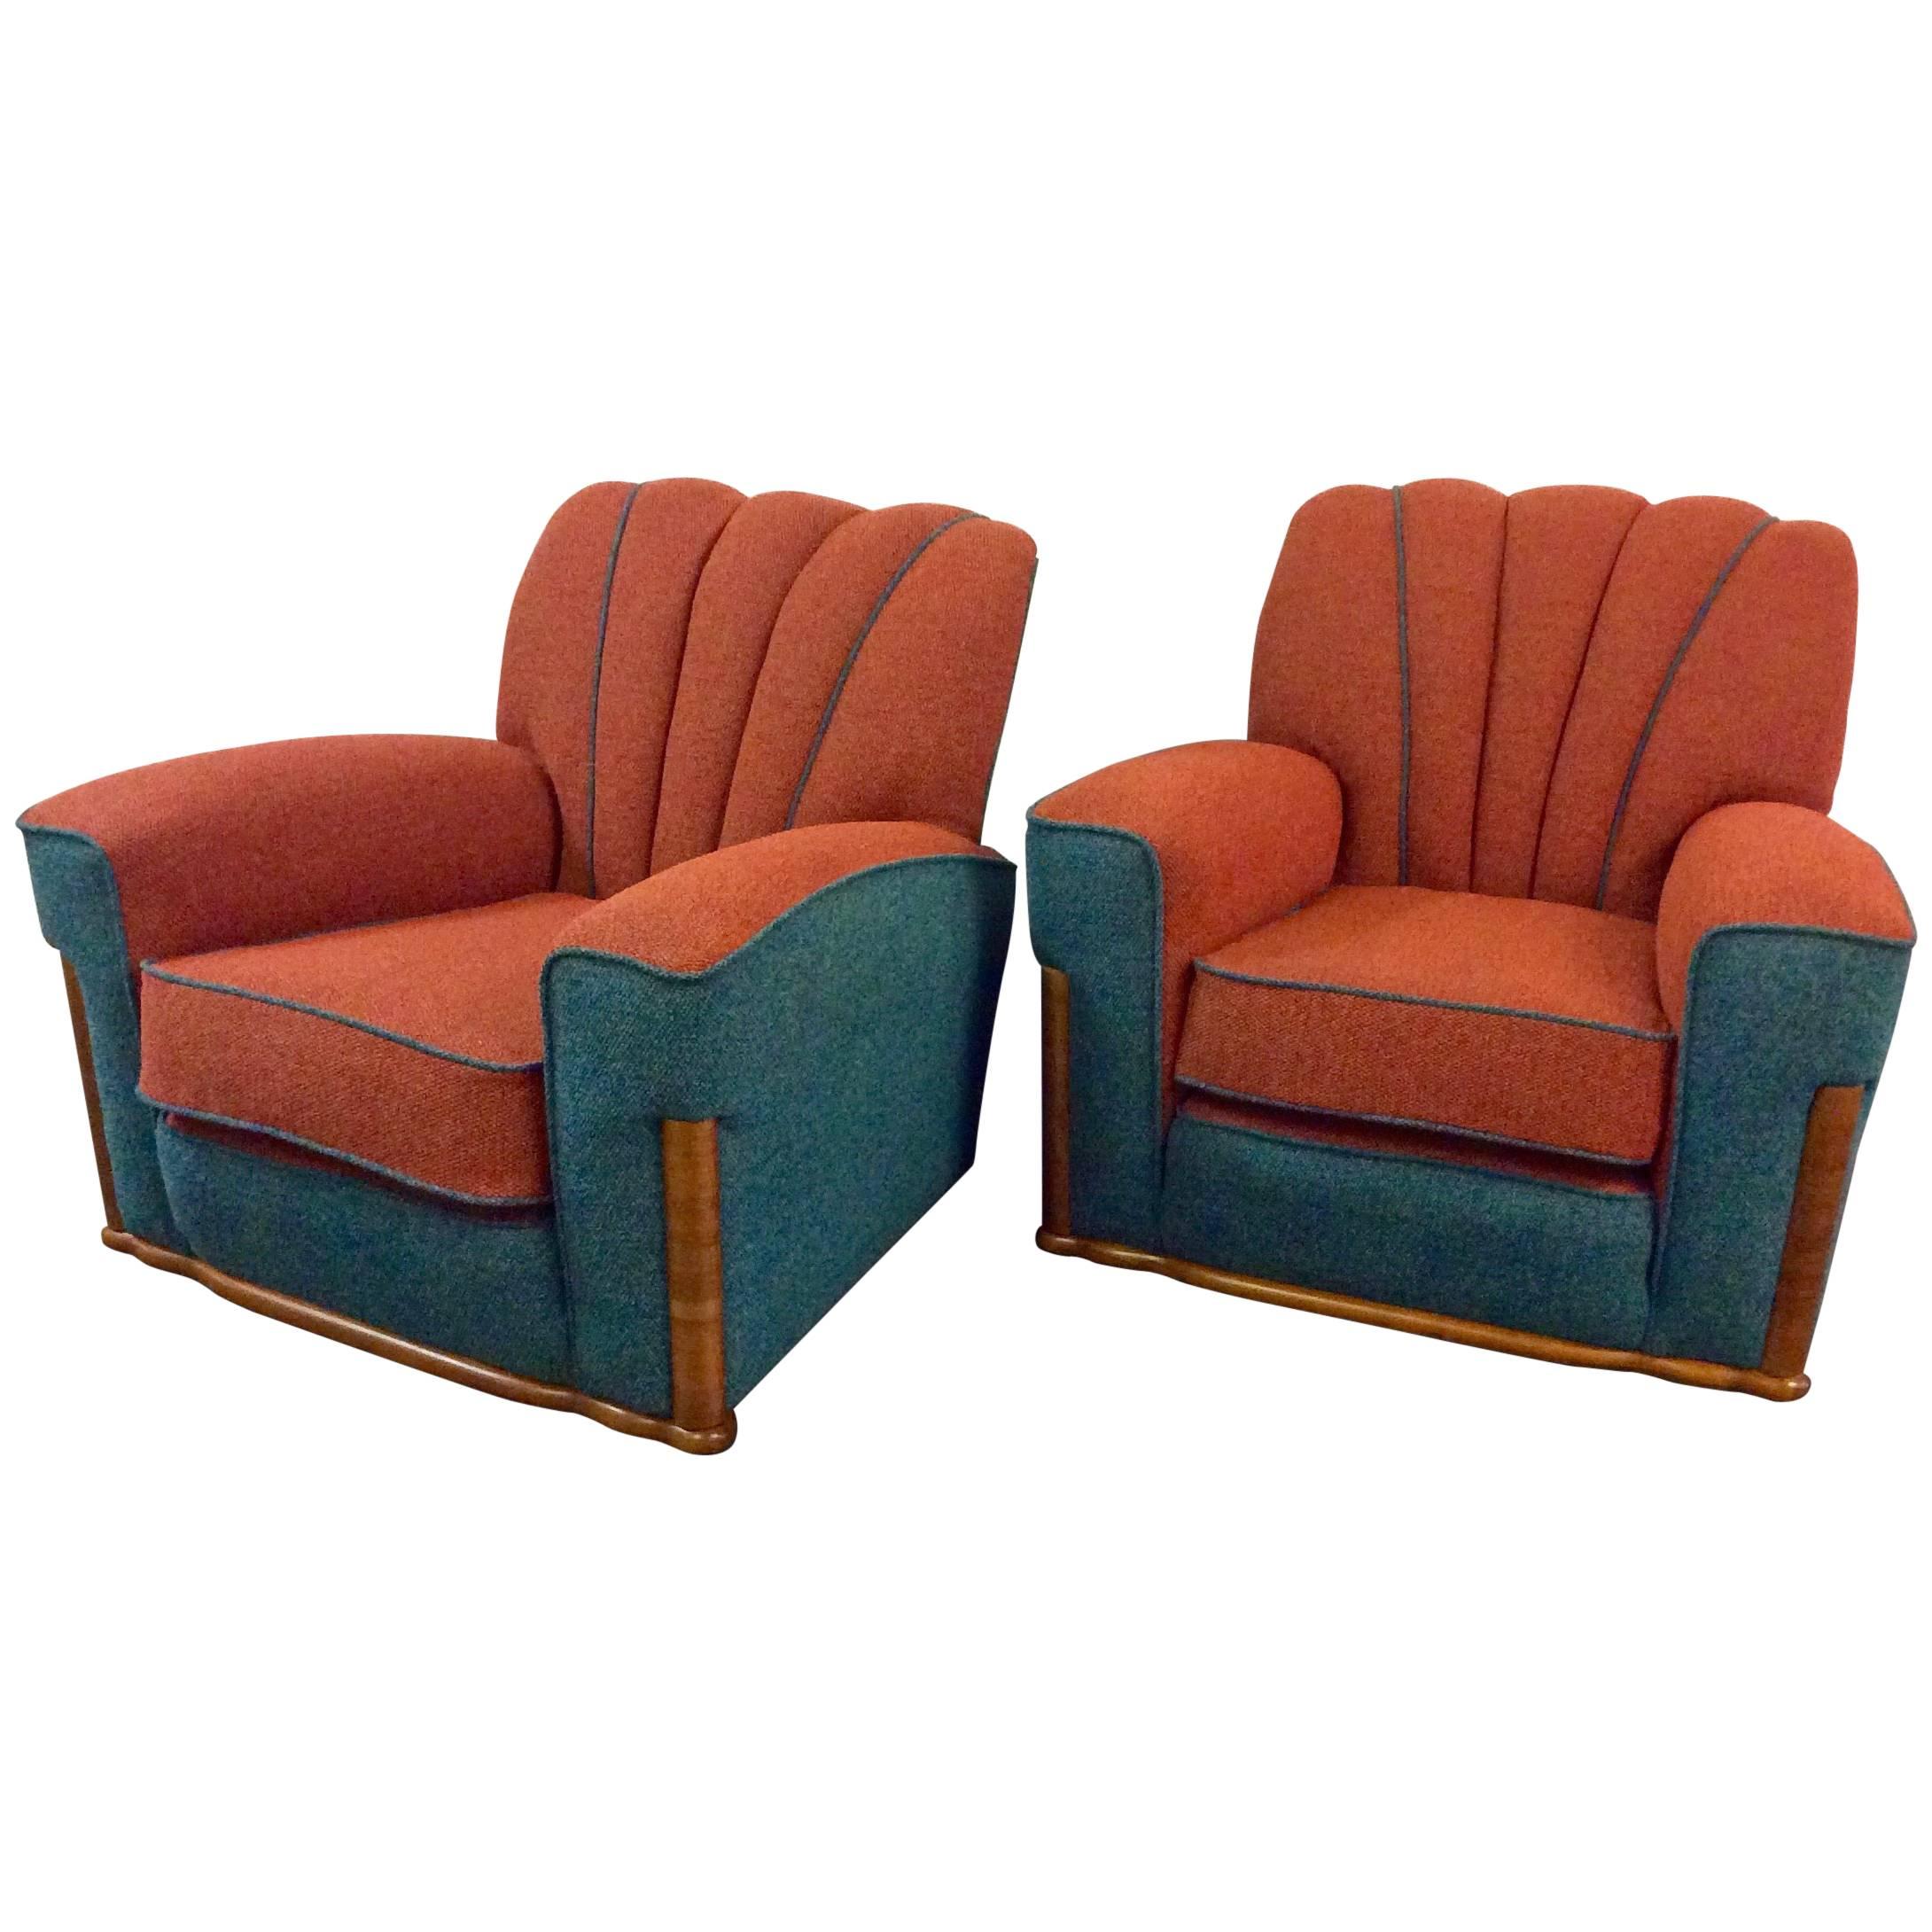 Pair of Art Deco Shell Back Armchairs Newly Upholstered